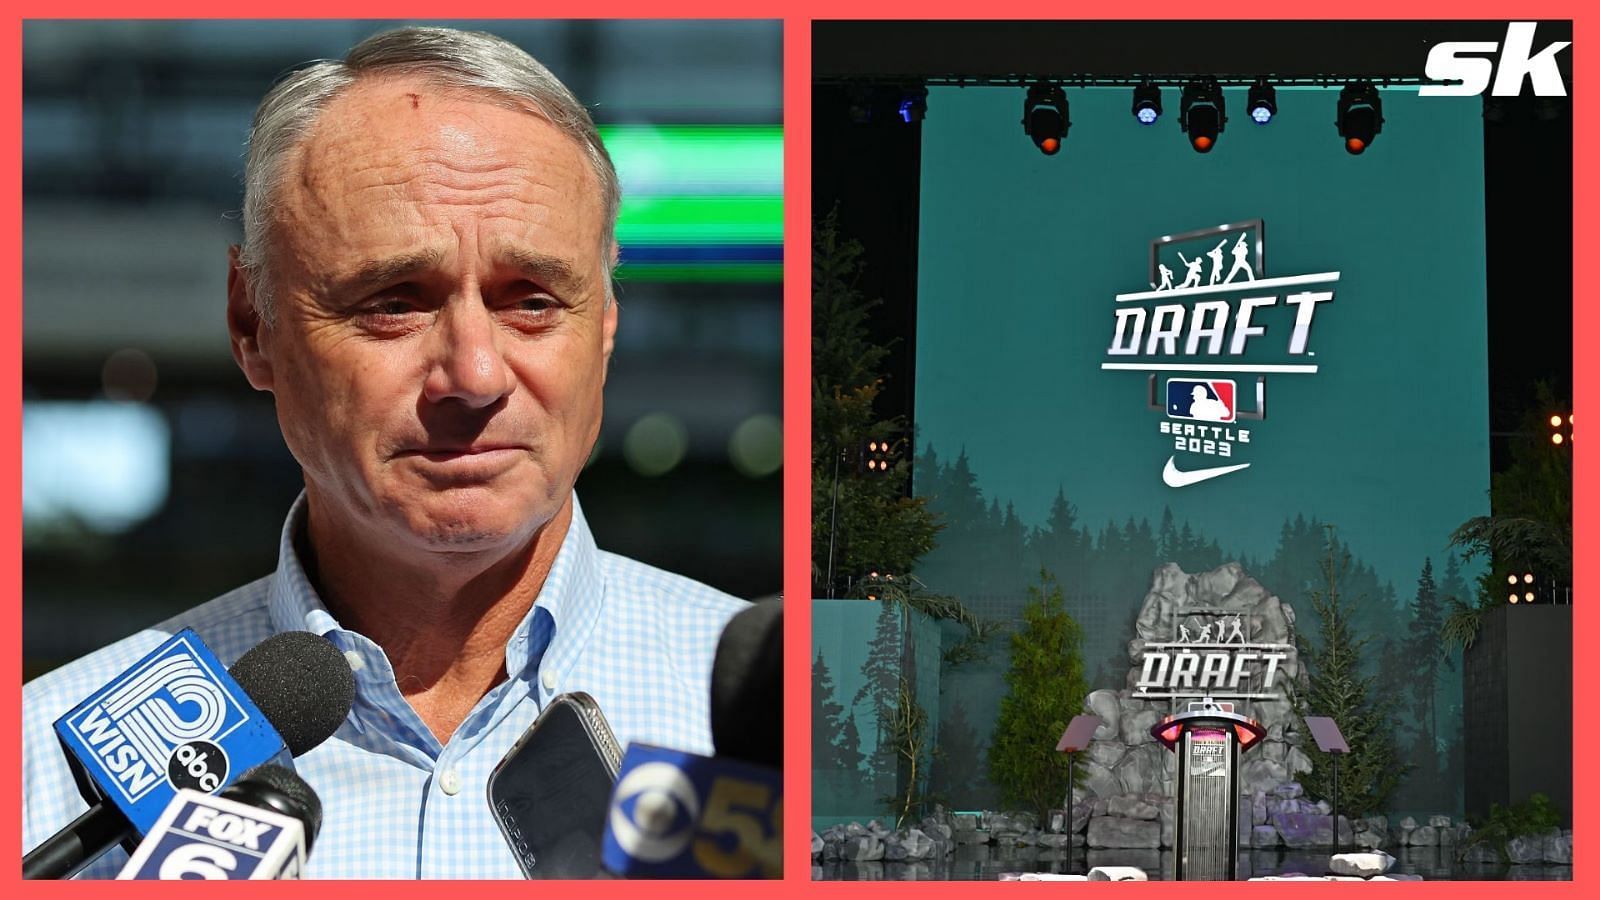 “He is the worst thing for baseball” “Not loudly enough” – Baseball fans enjoy commissioner Rob Manfred being consistently booed at the MLB Draft